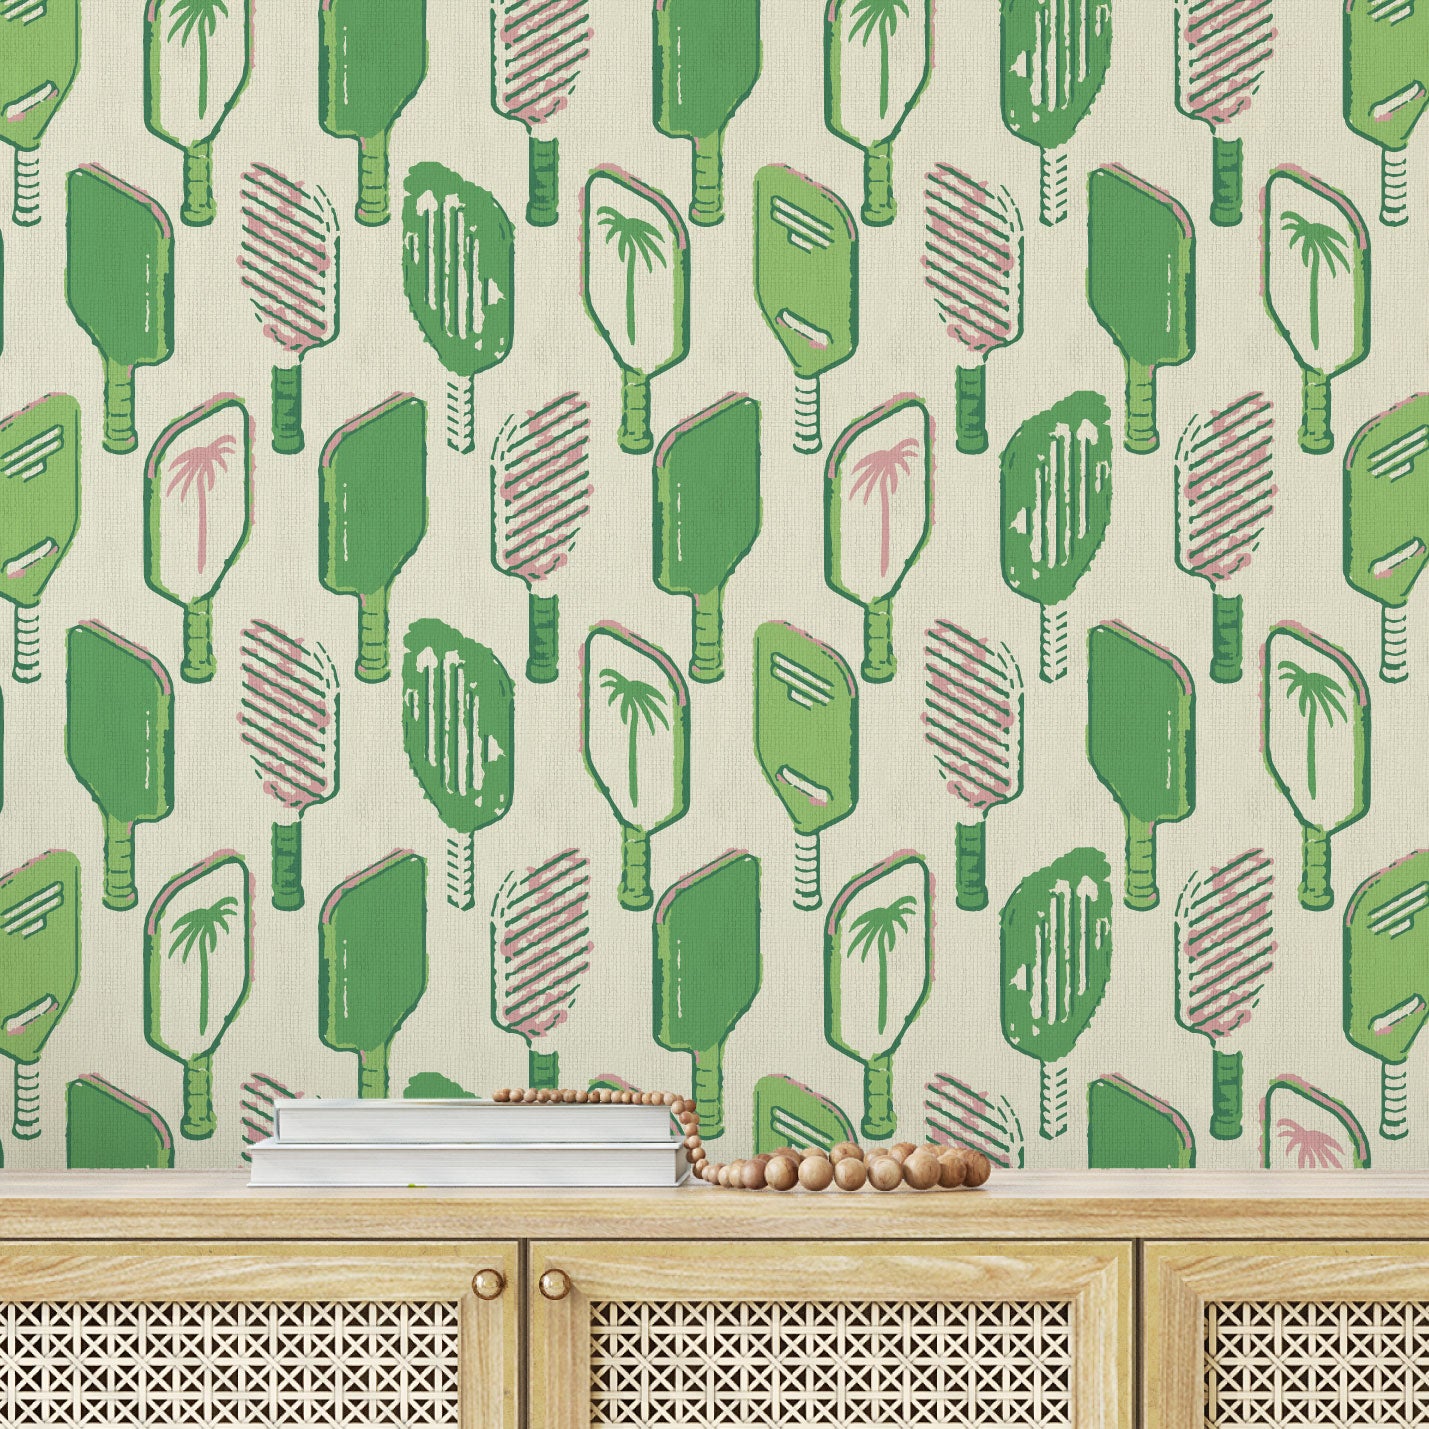 Grasscloth wallpaper Natural Textured Eco-Friendly Non-toxic High-quality Sustainable Interior Design Bold Custom Tailor-made Retro chic Tropical Jungle Coastal Cabana preppy Pickleball prep preppie country club traditional maximalism